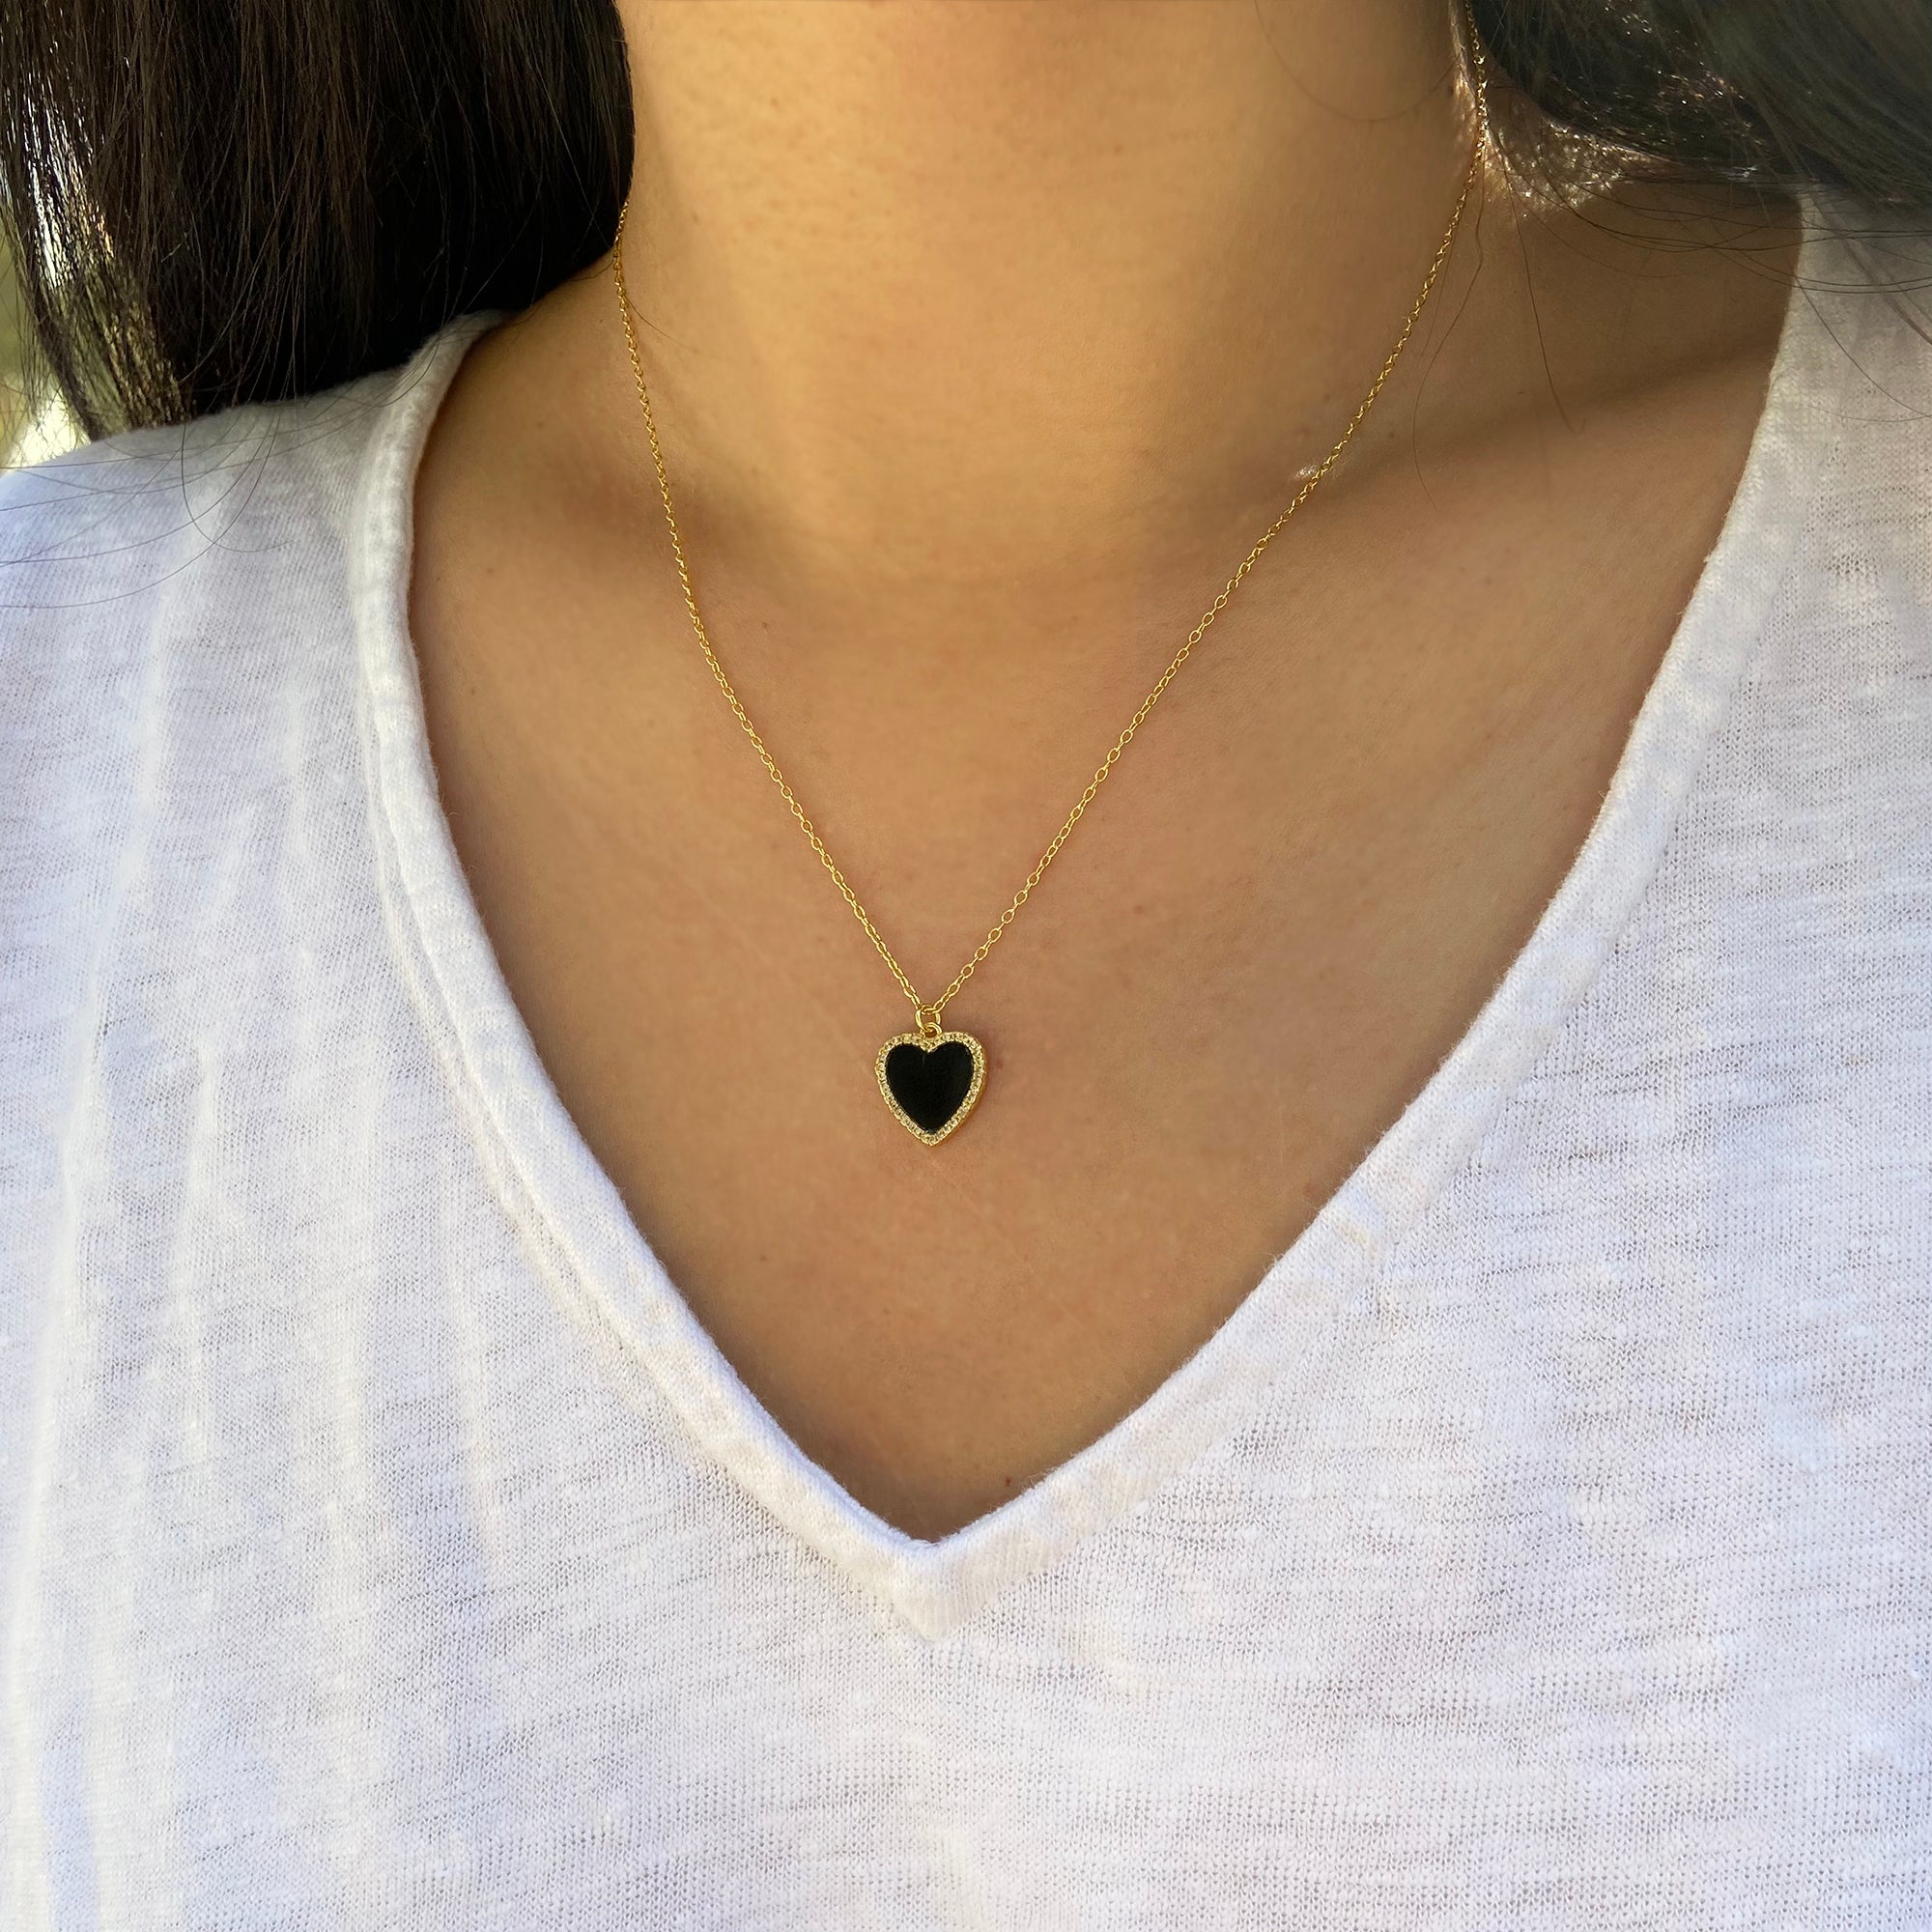 Black Onyx Heart Necklace with Crystals